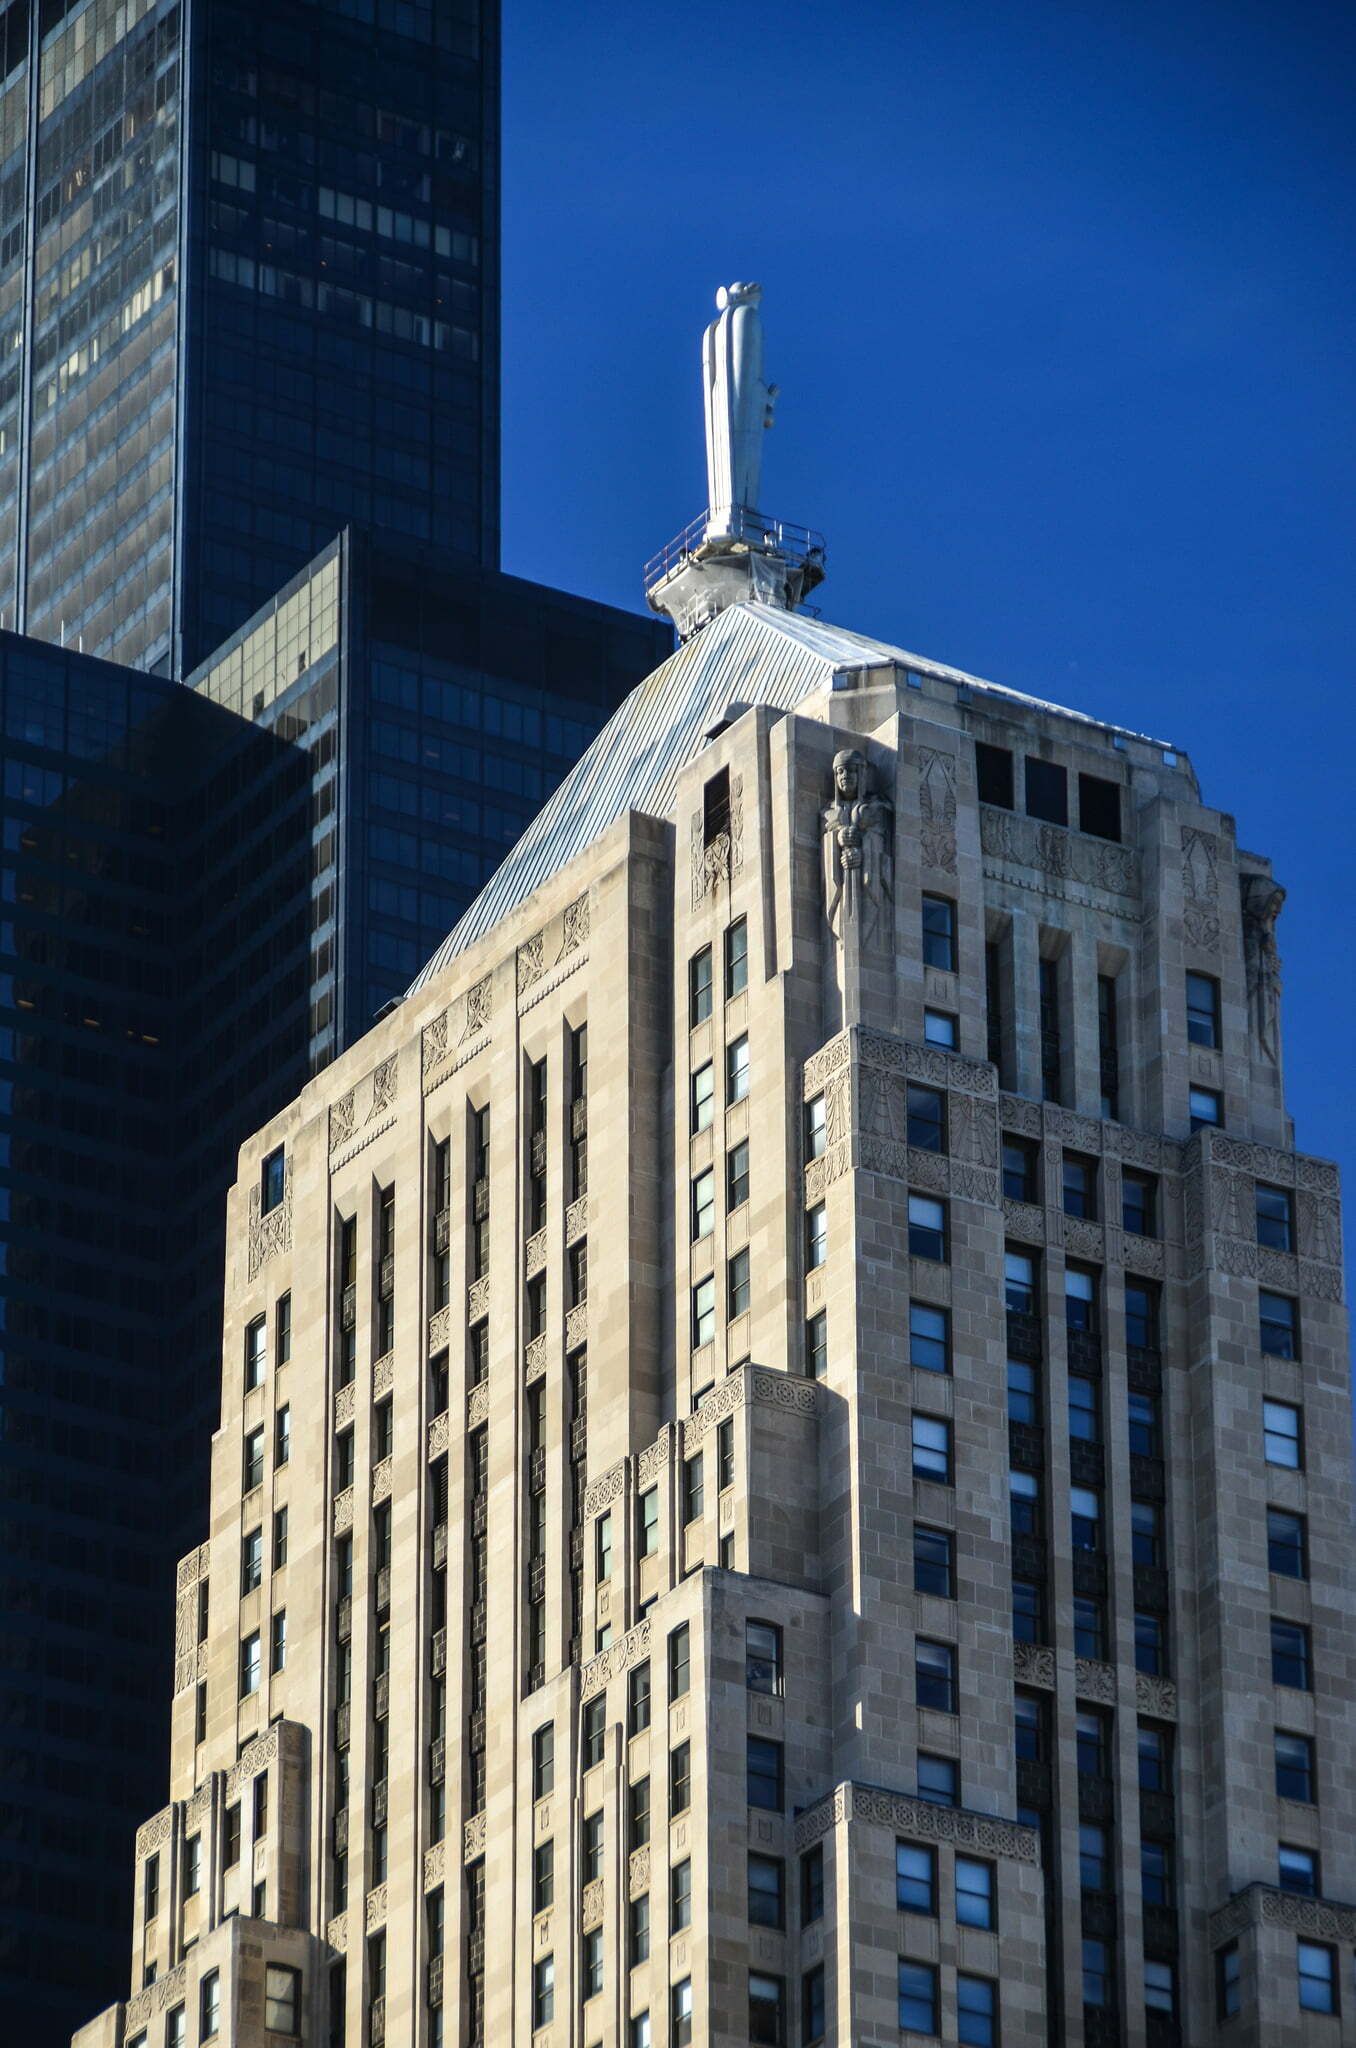 Stature of Ceres, goddess of grain, by artist John Storr atop Chicago Board of Trade Building, 1930, Holabird & Root 141 W. Jackson Blvd. Photo Credit: Eric Allix Rogers